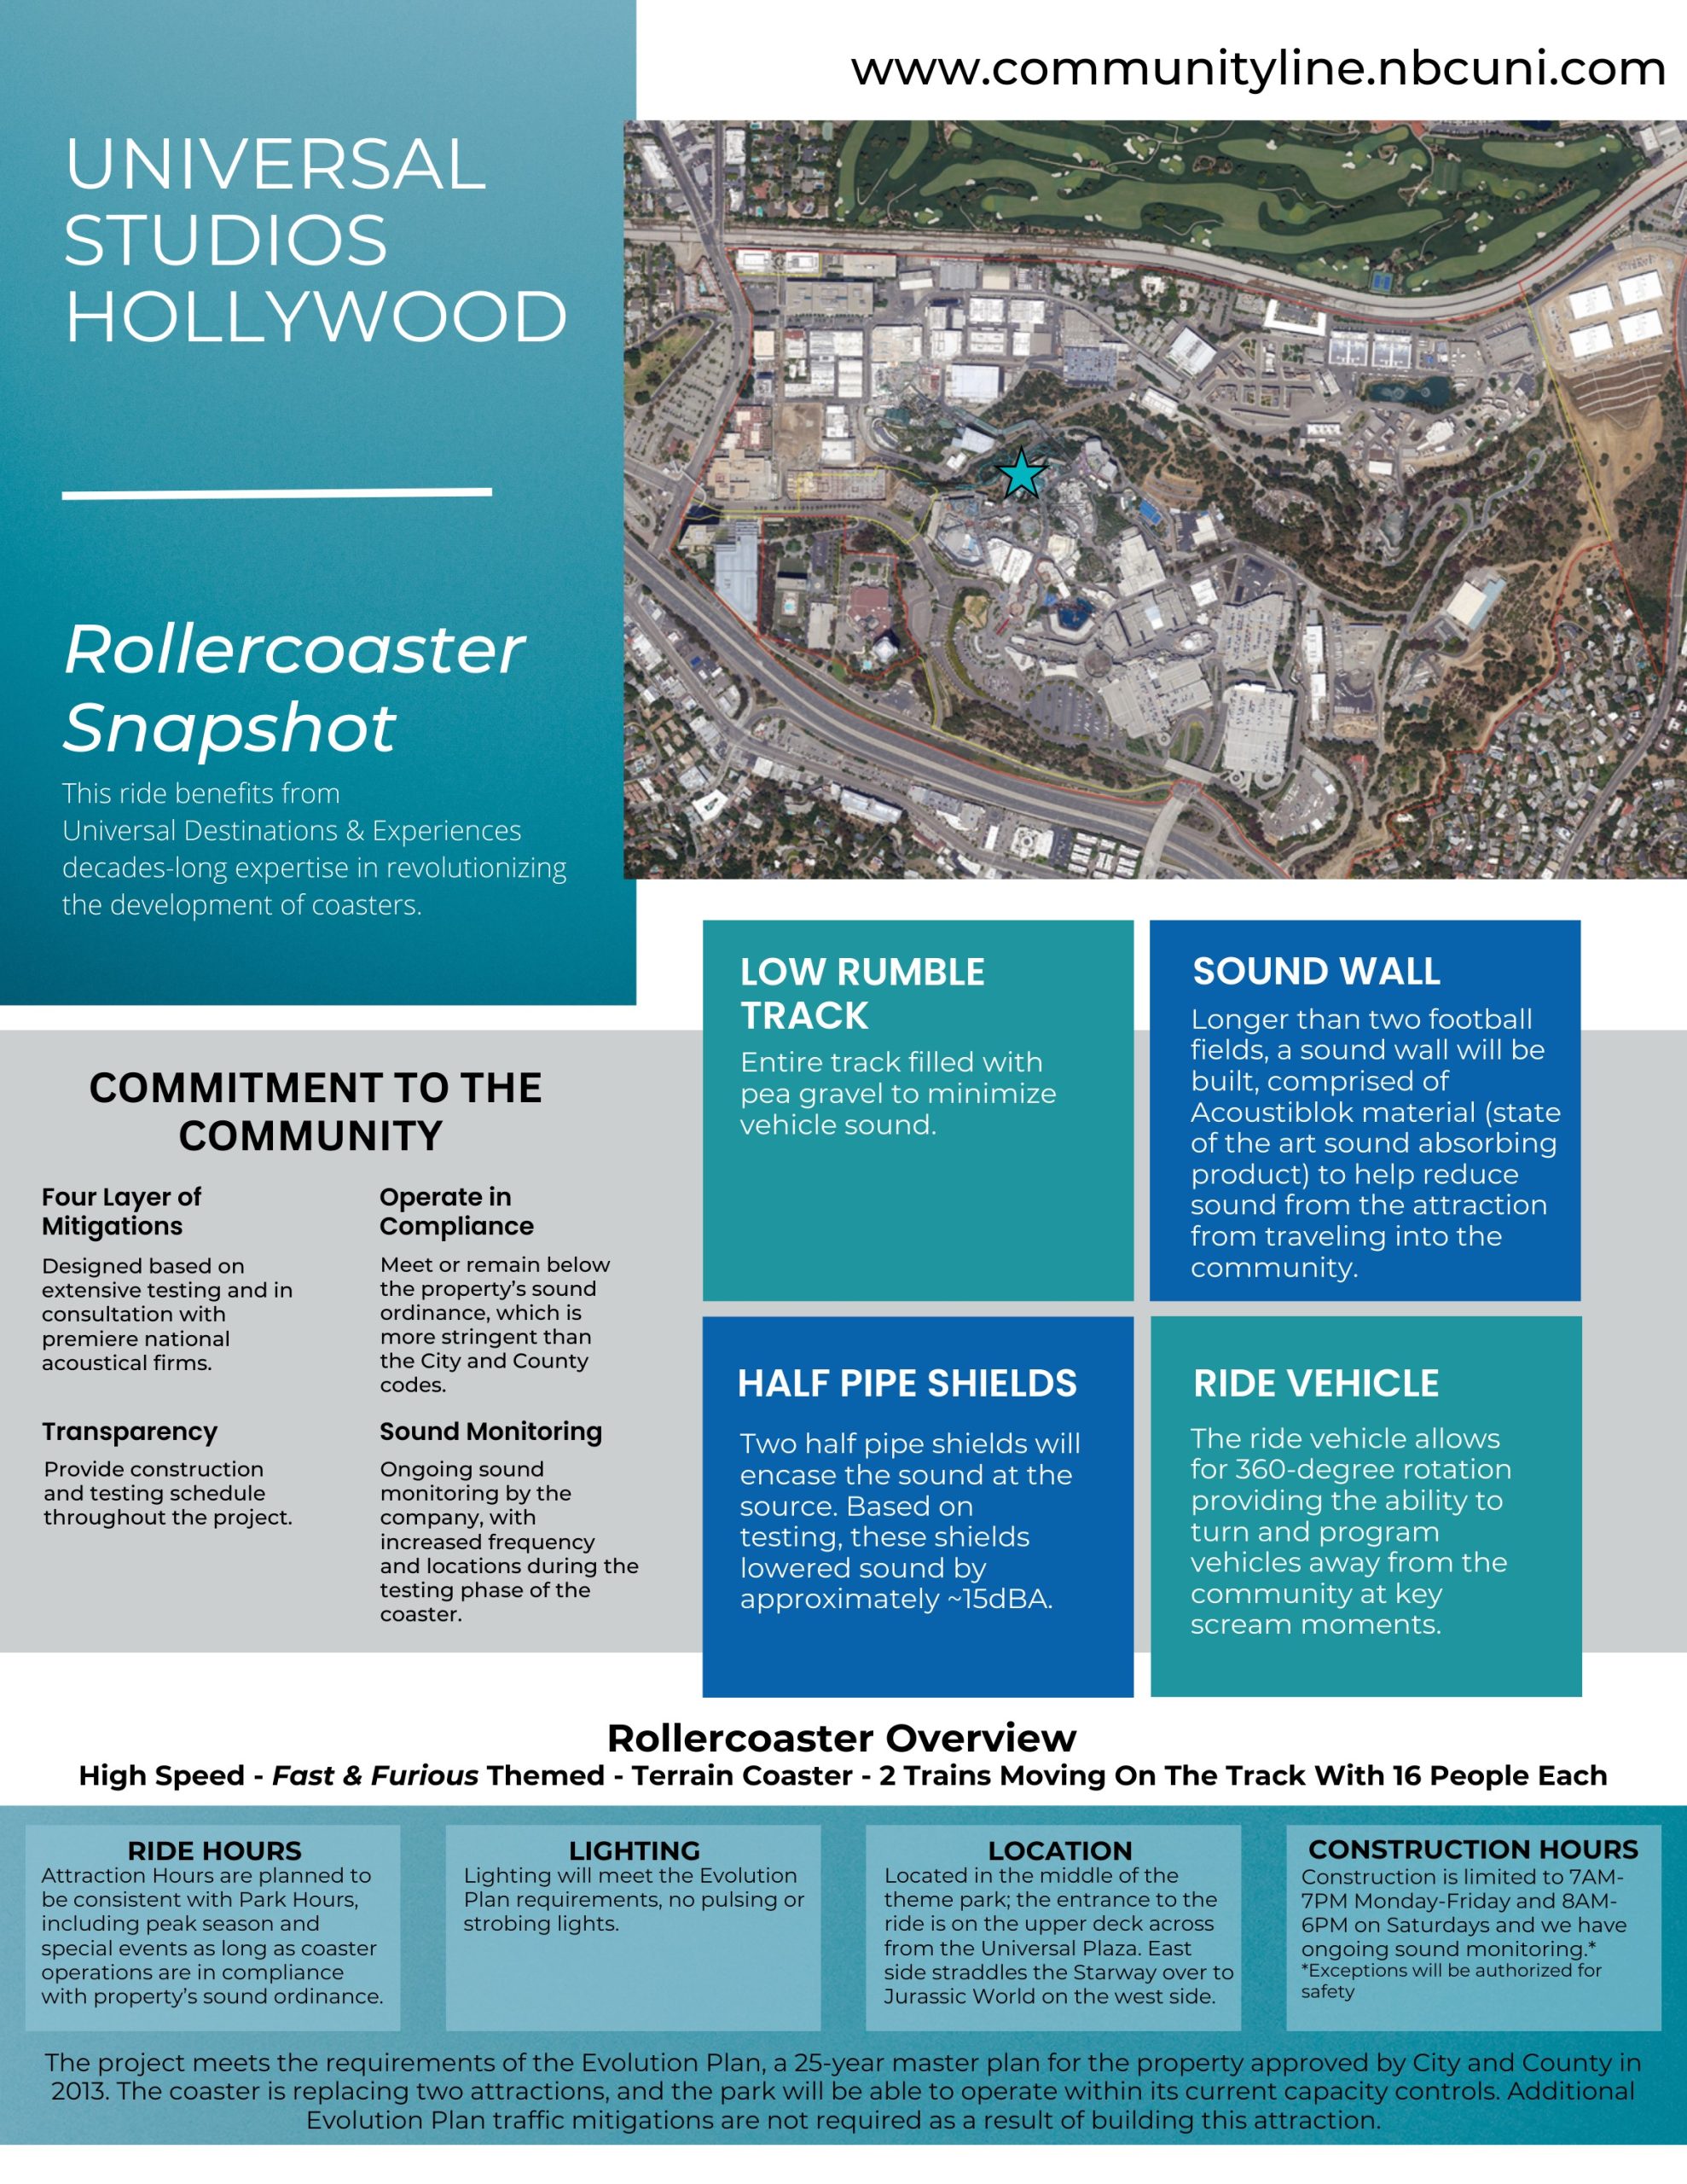 Universal Studios Hollywood's Fast & Furious Roller Coaster Officially  Announced – Orlando ParkStop